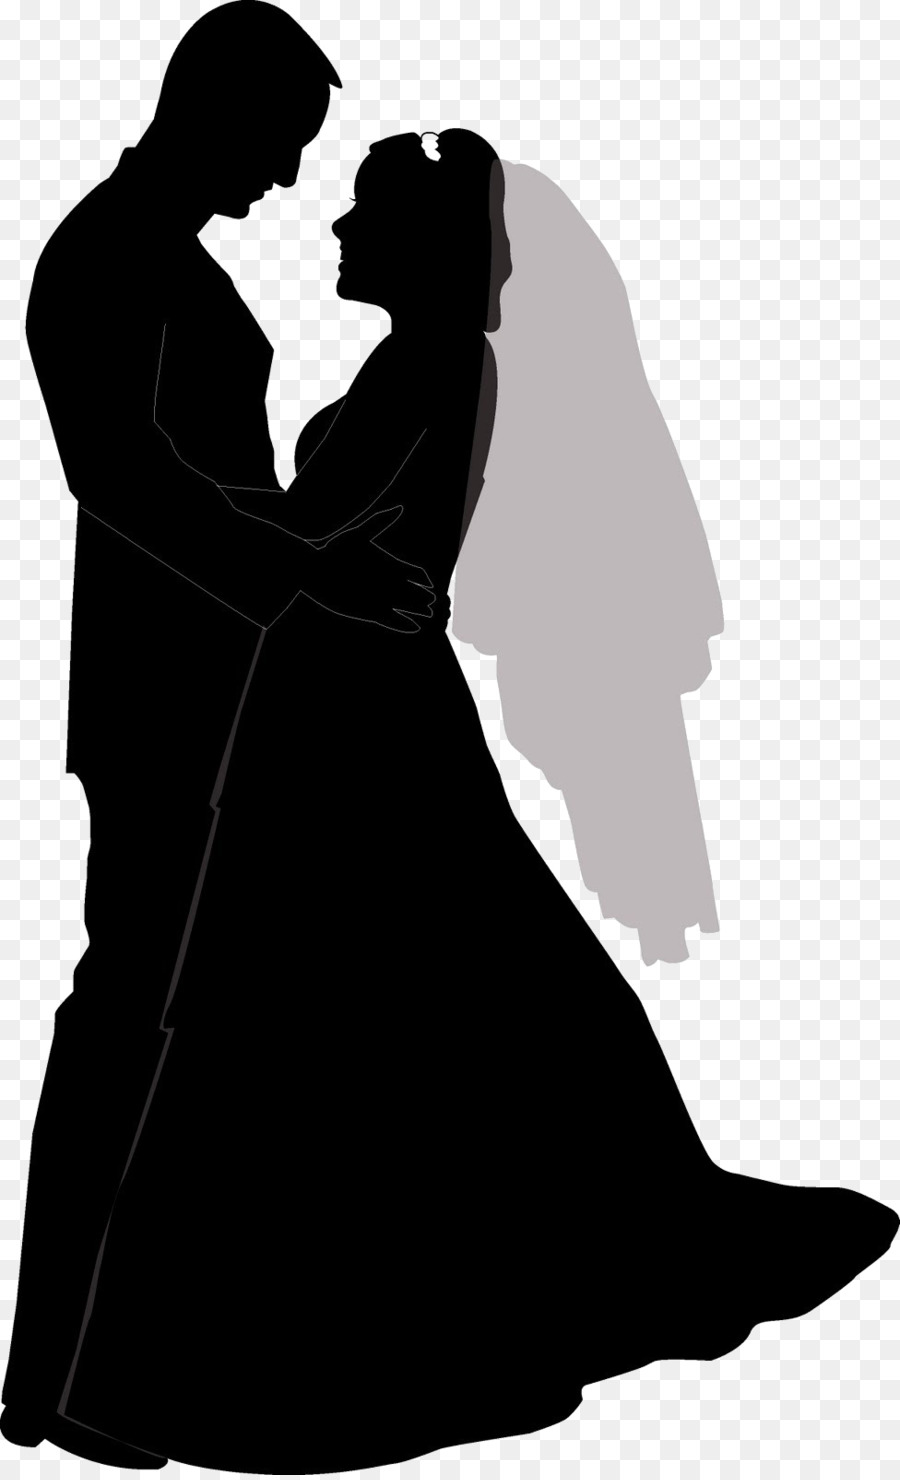 Clip art Wedding Openclipart Silhouette Bride - wedding png download - 976*1600 - Free Transparent Wedding png Download.